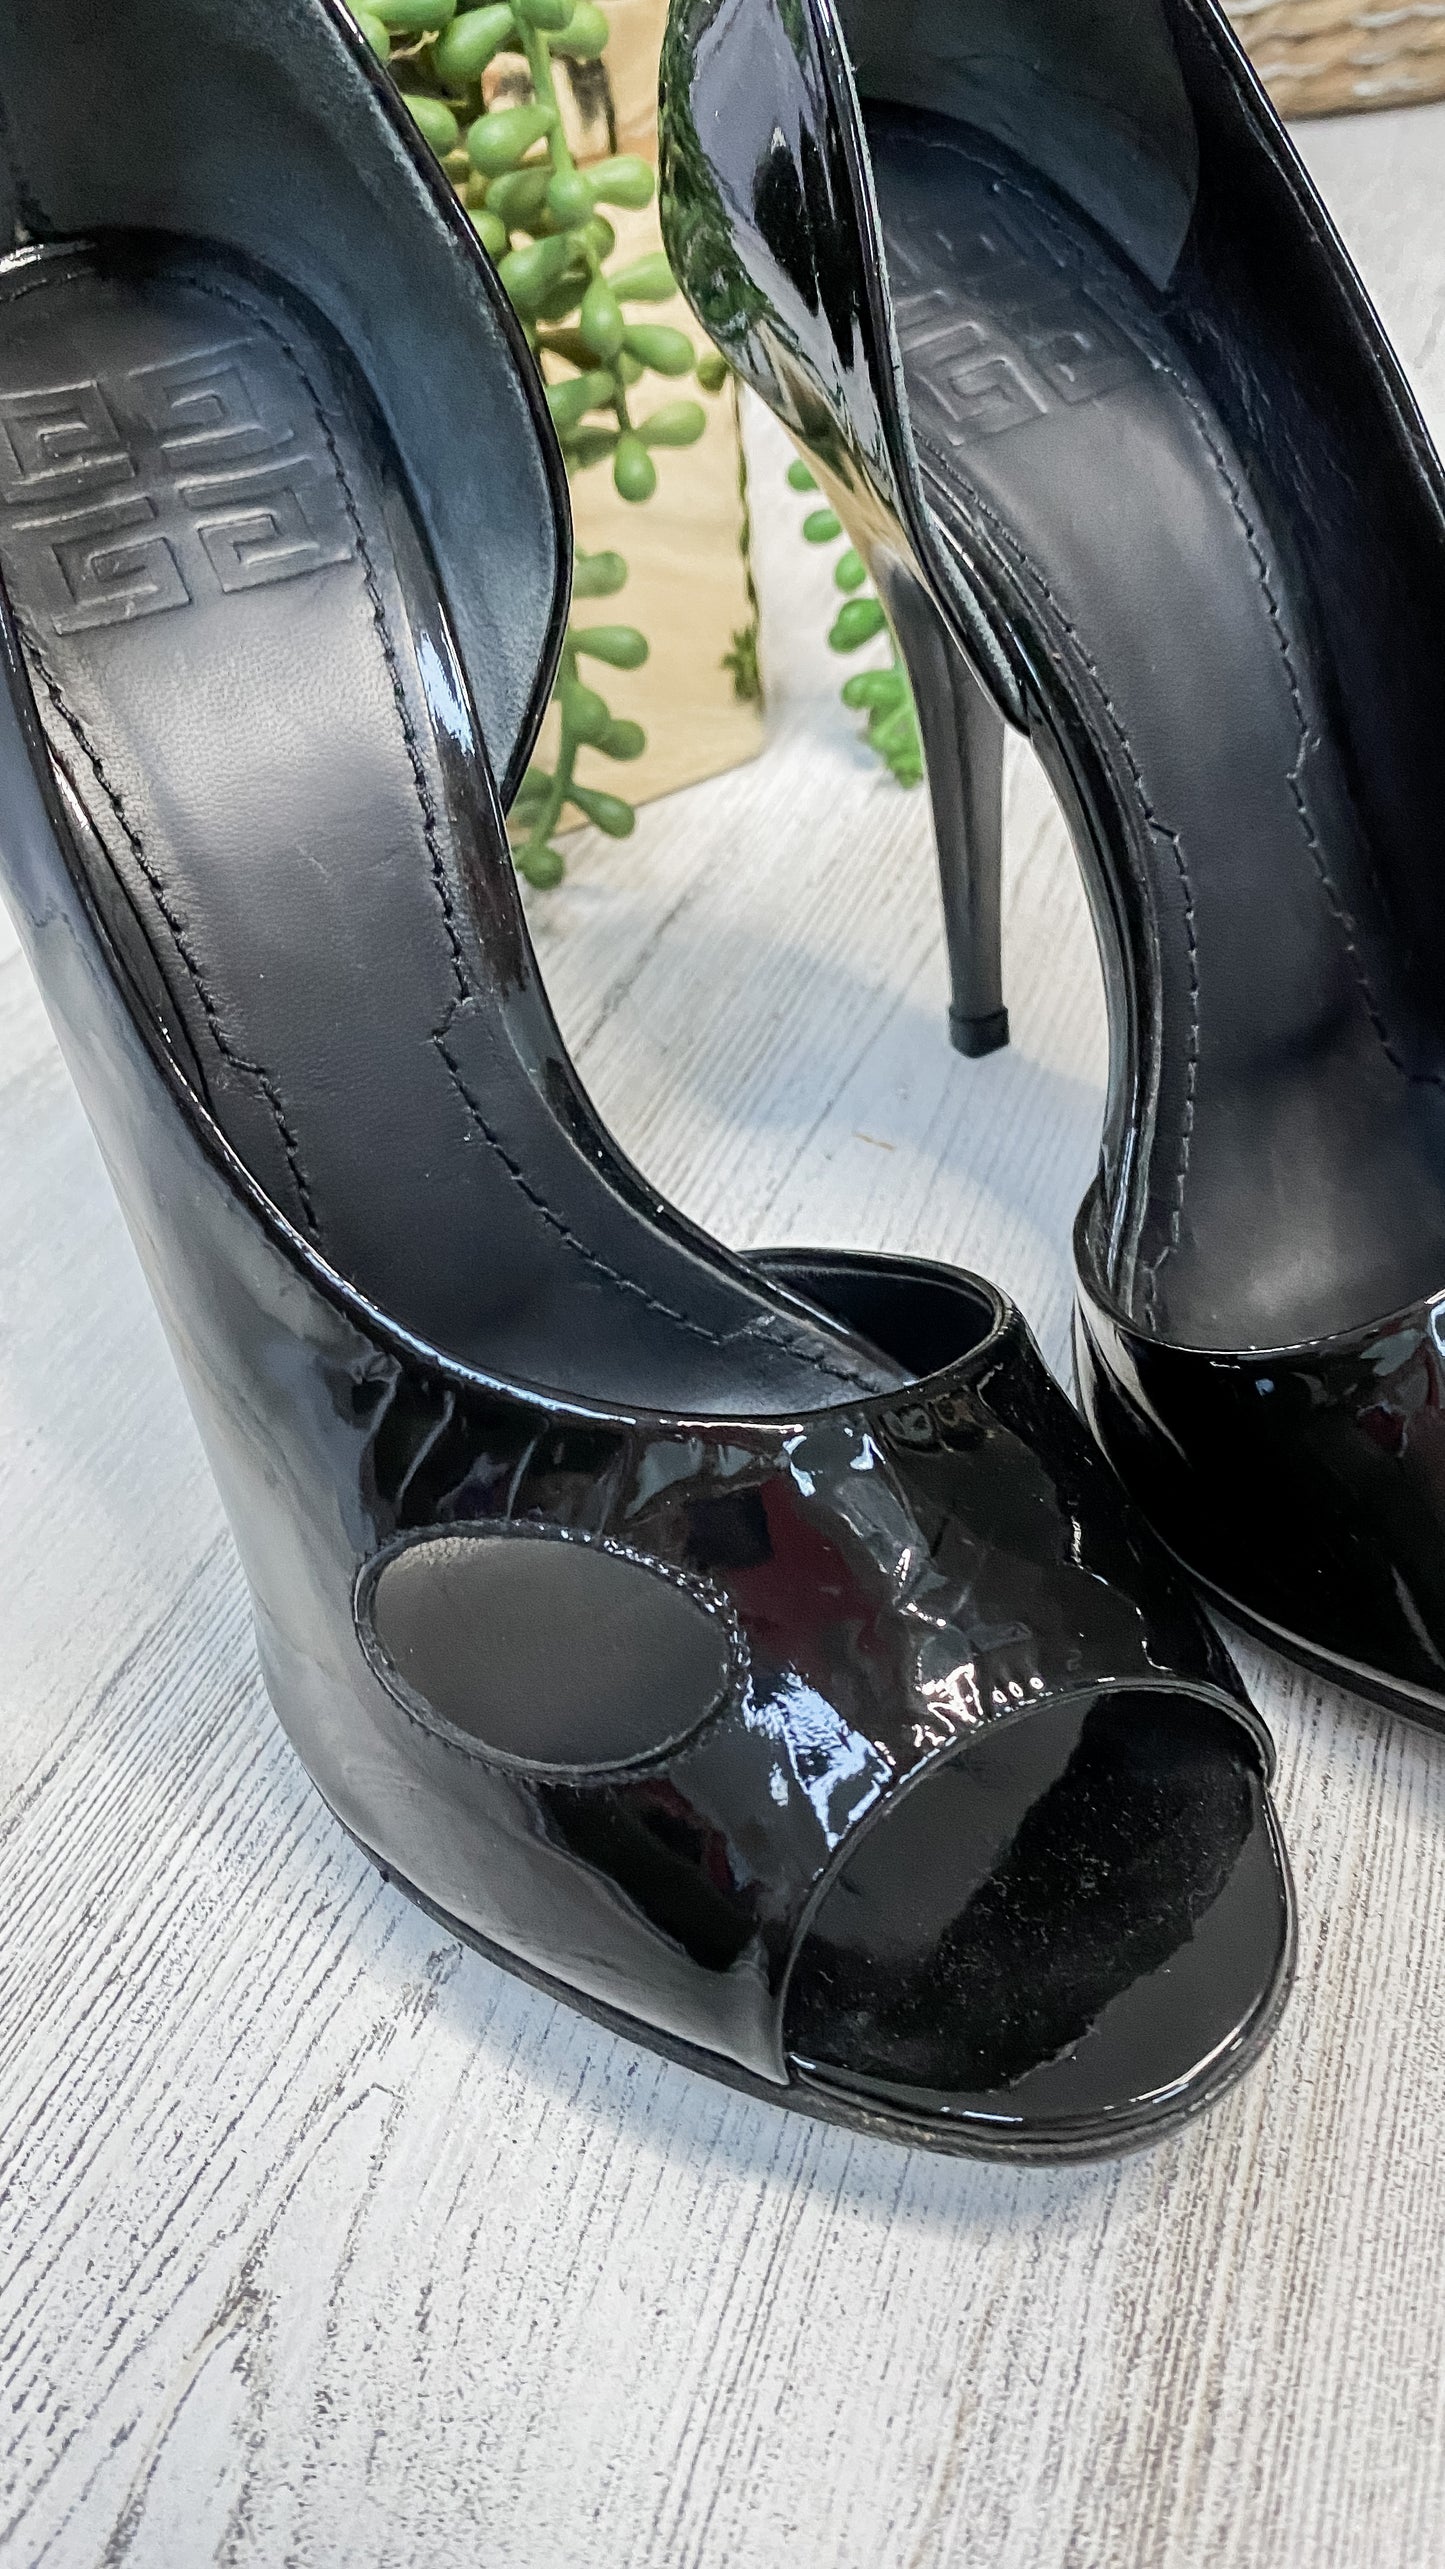 Givenchy Black Patent Leather D’Orsay Peep Toe Cut Out Heels (38/8)